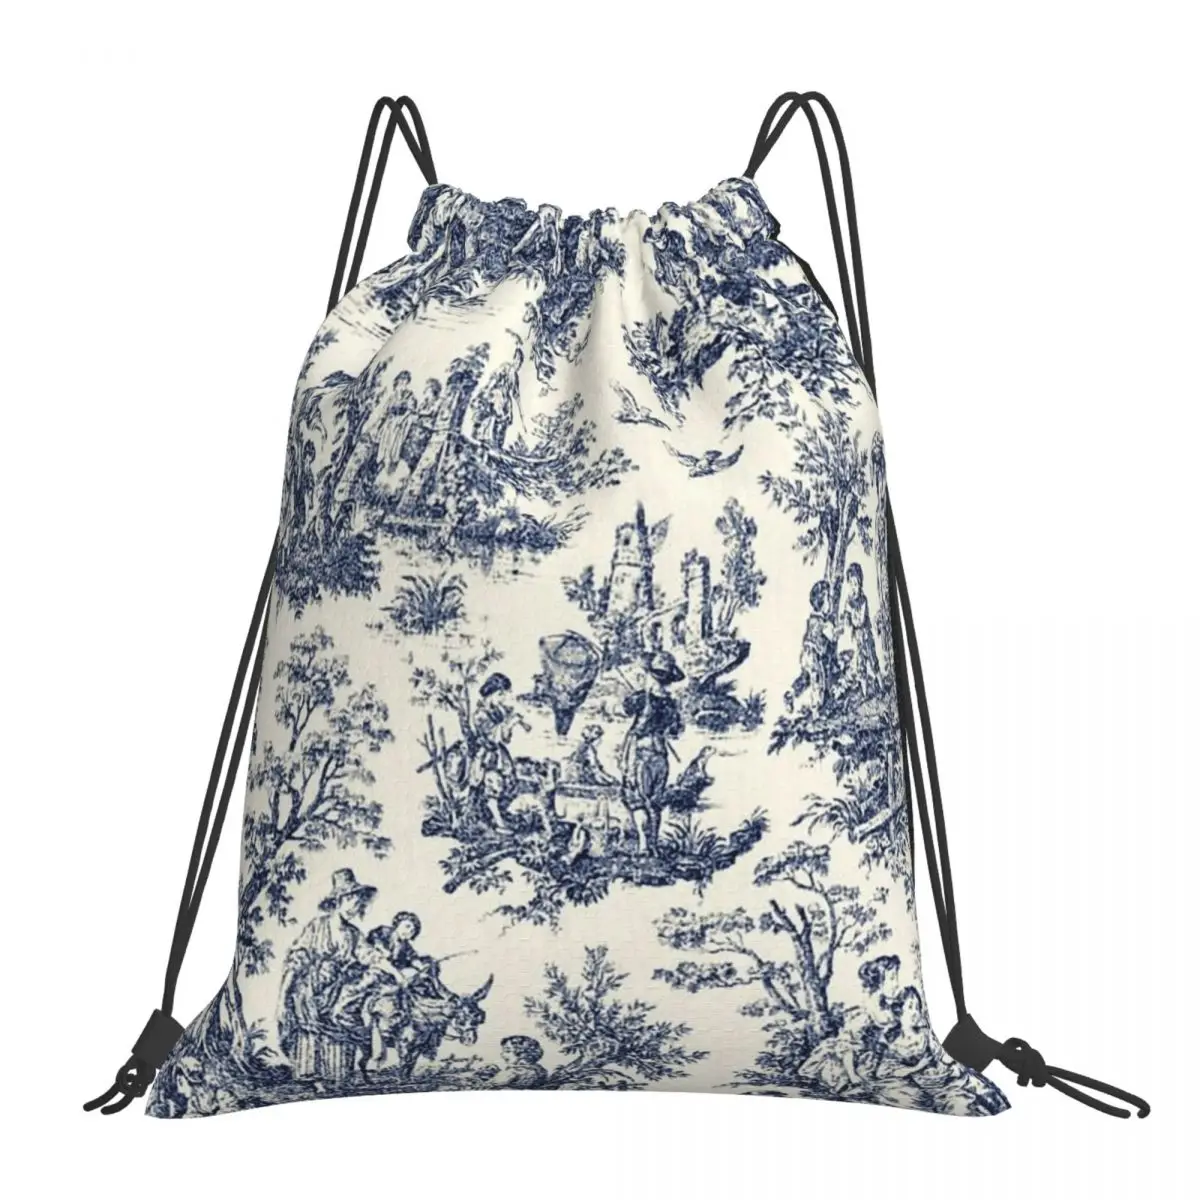 

Nomades Artsy Vintage Toile De Jouy Backpacks Fashion Portable Drawstring Bags Shoes Bag Book Bags For Man Woman Students